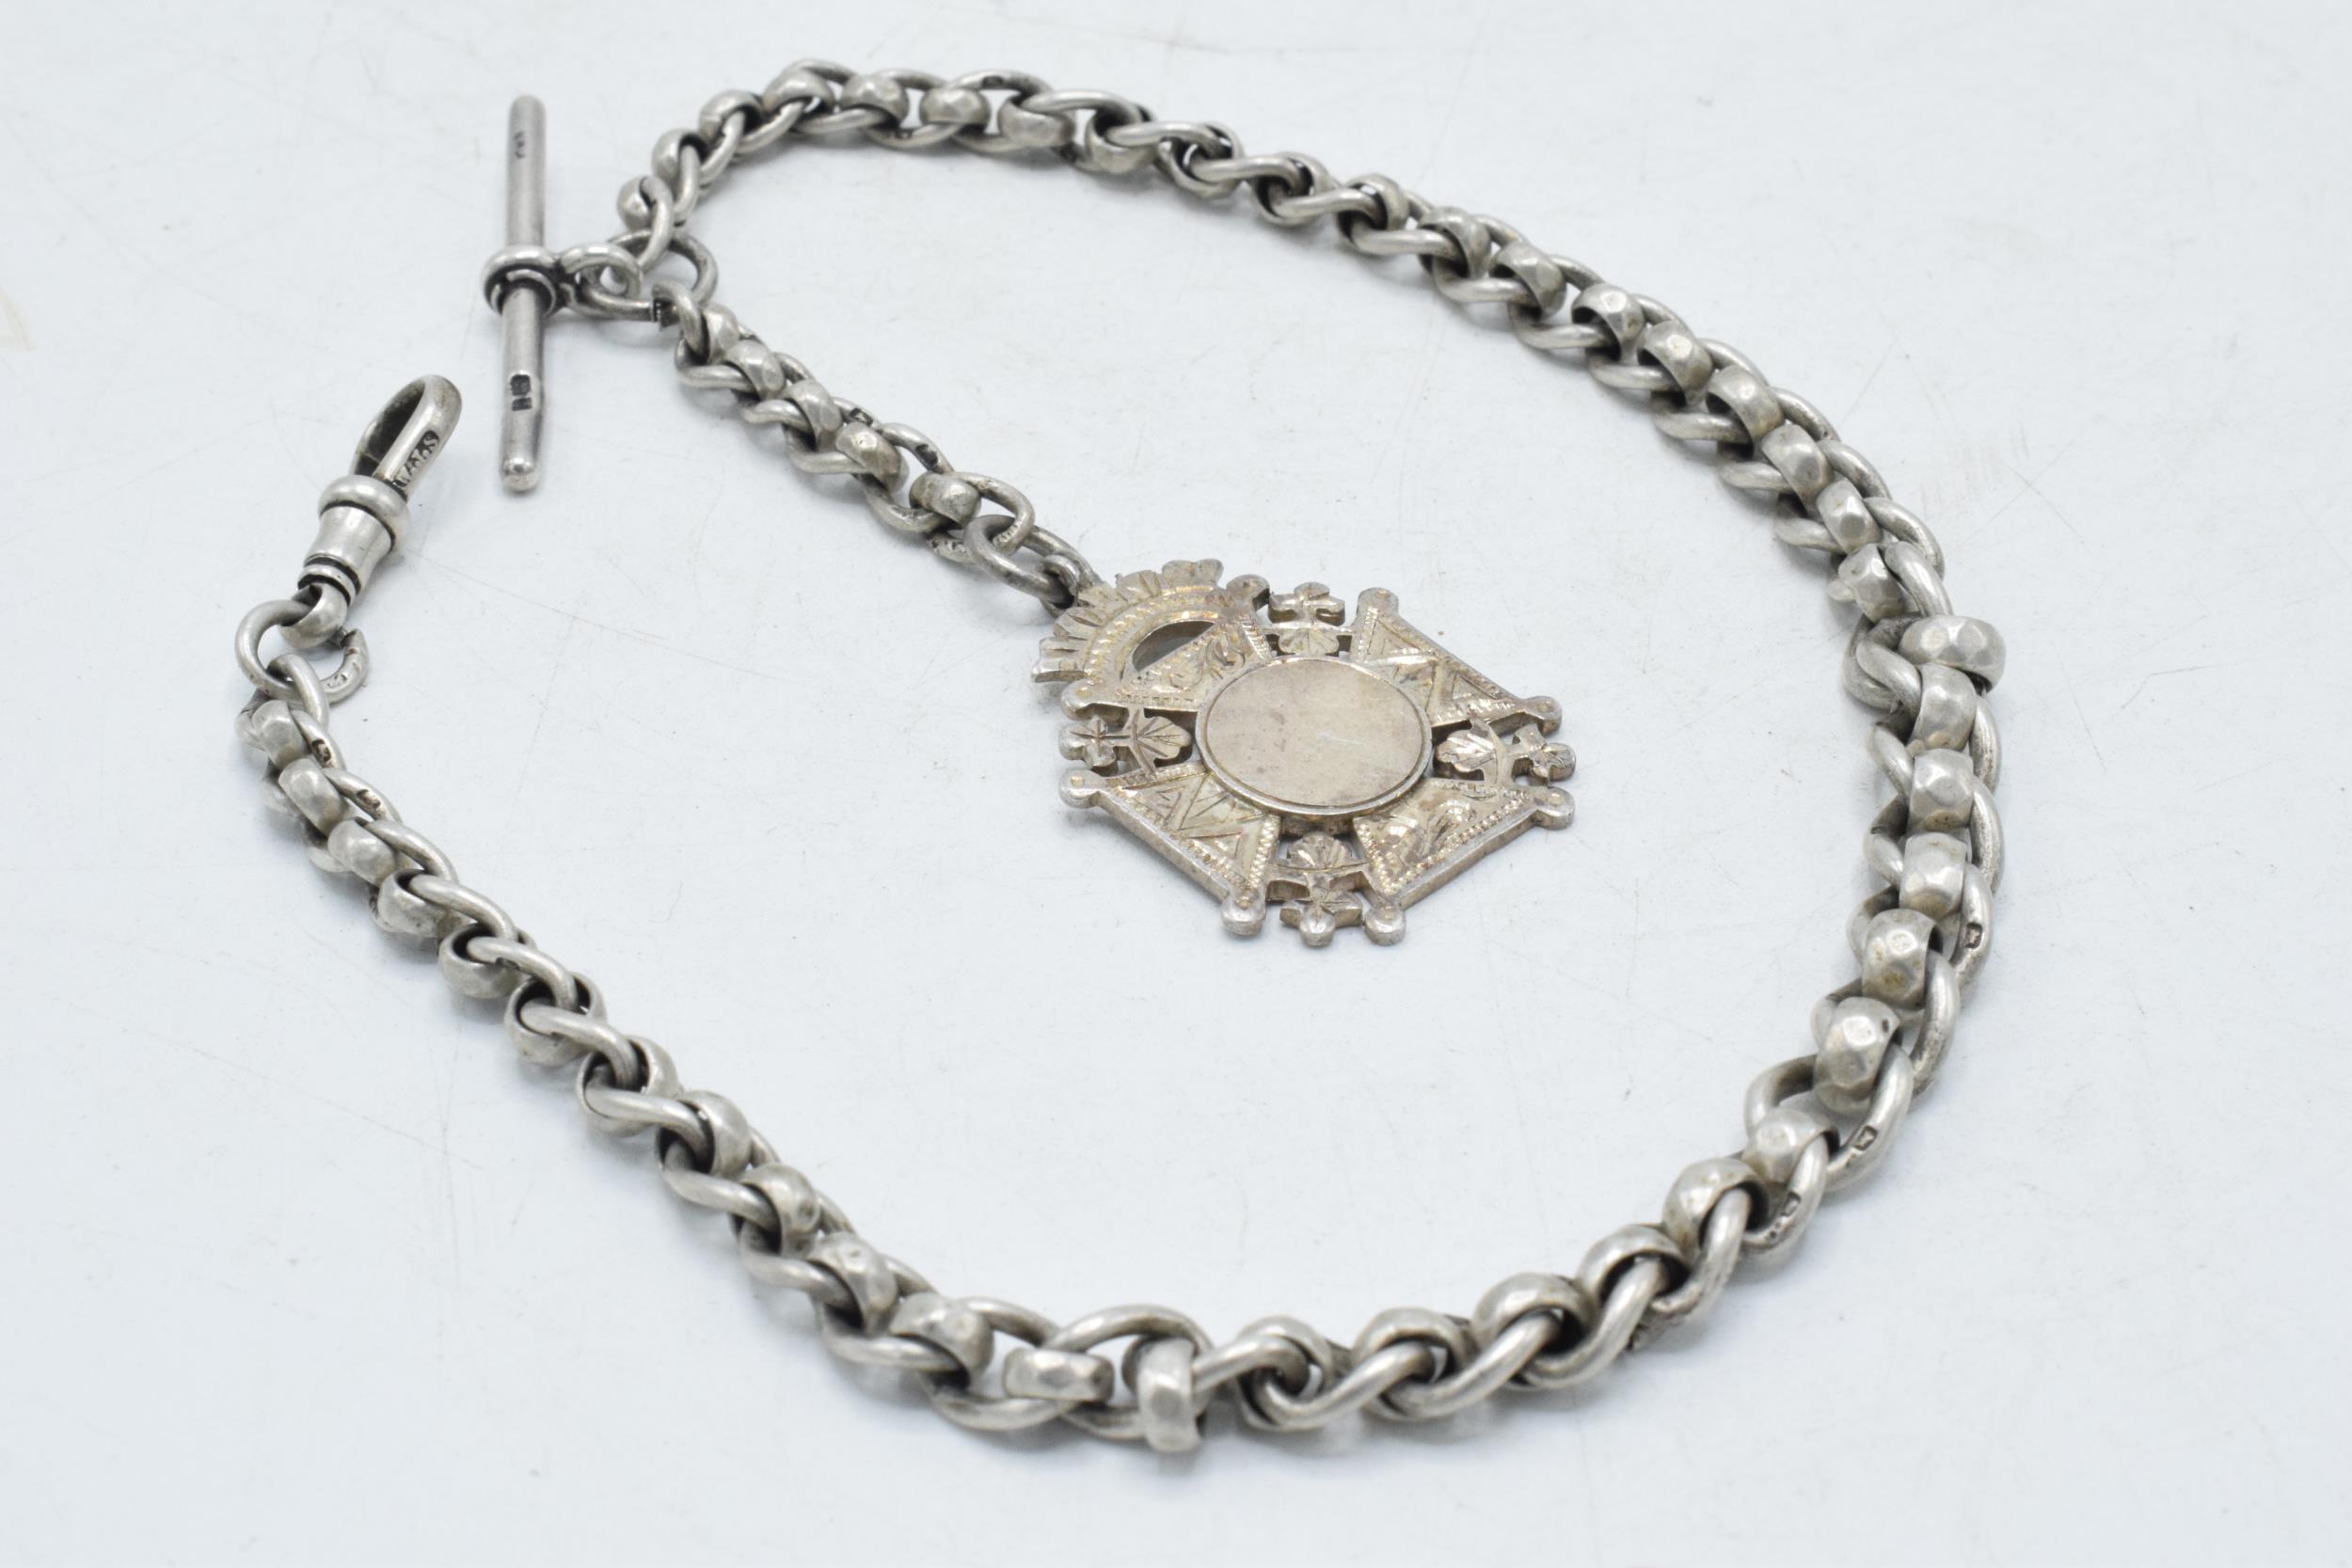 Hallmarked silver Albert pocket watch chain with hallmarked T-bar and fob, 45.8 grams, 41cm long. - Image 2 of 3